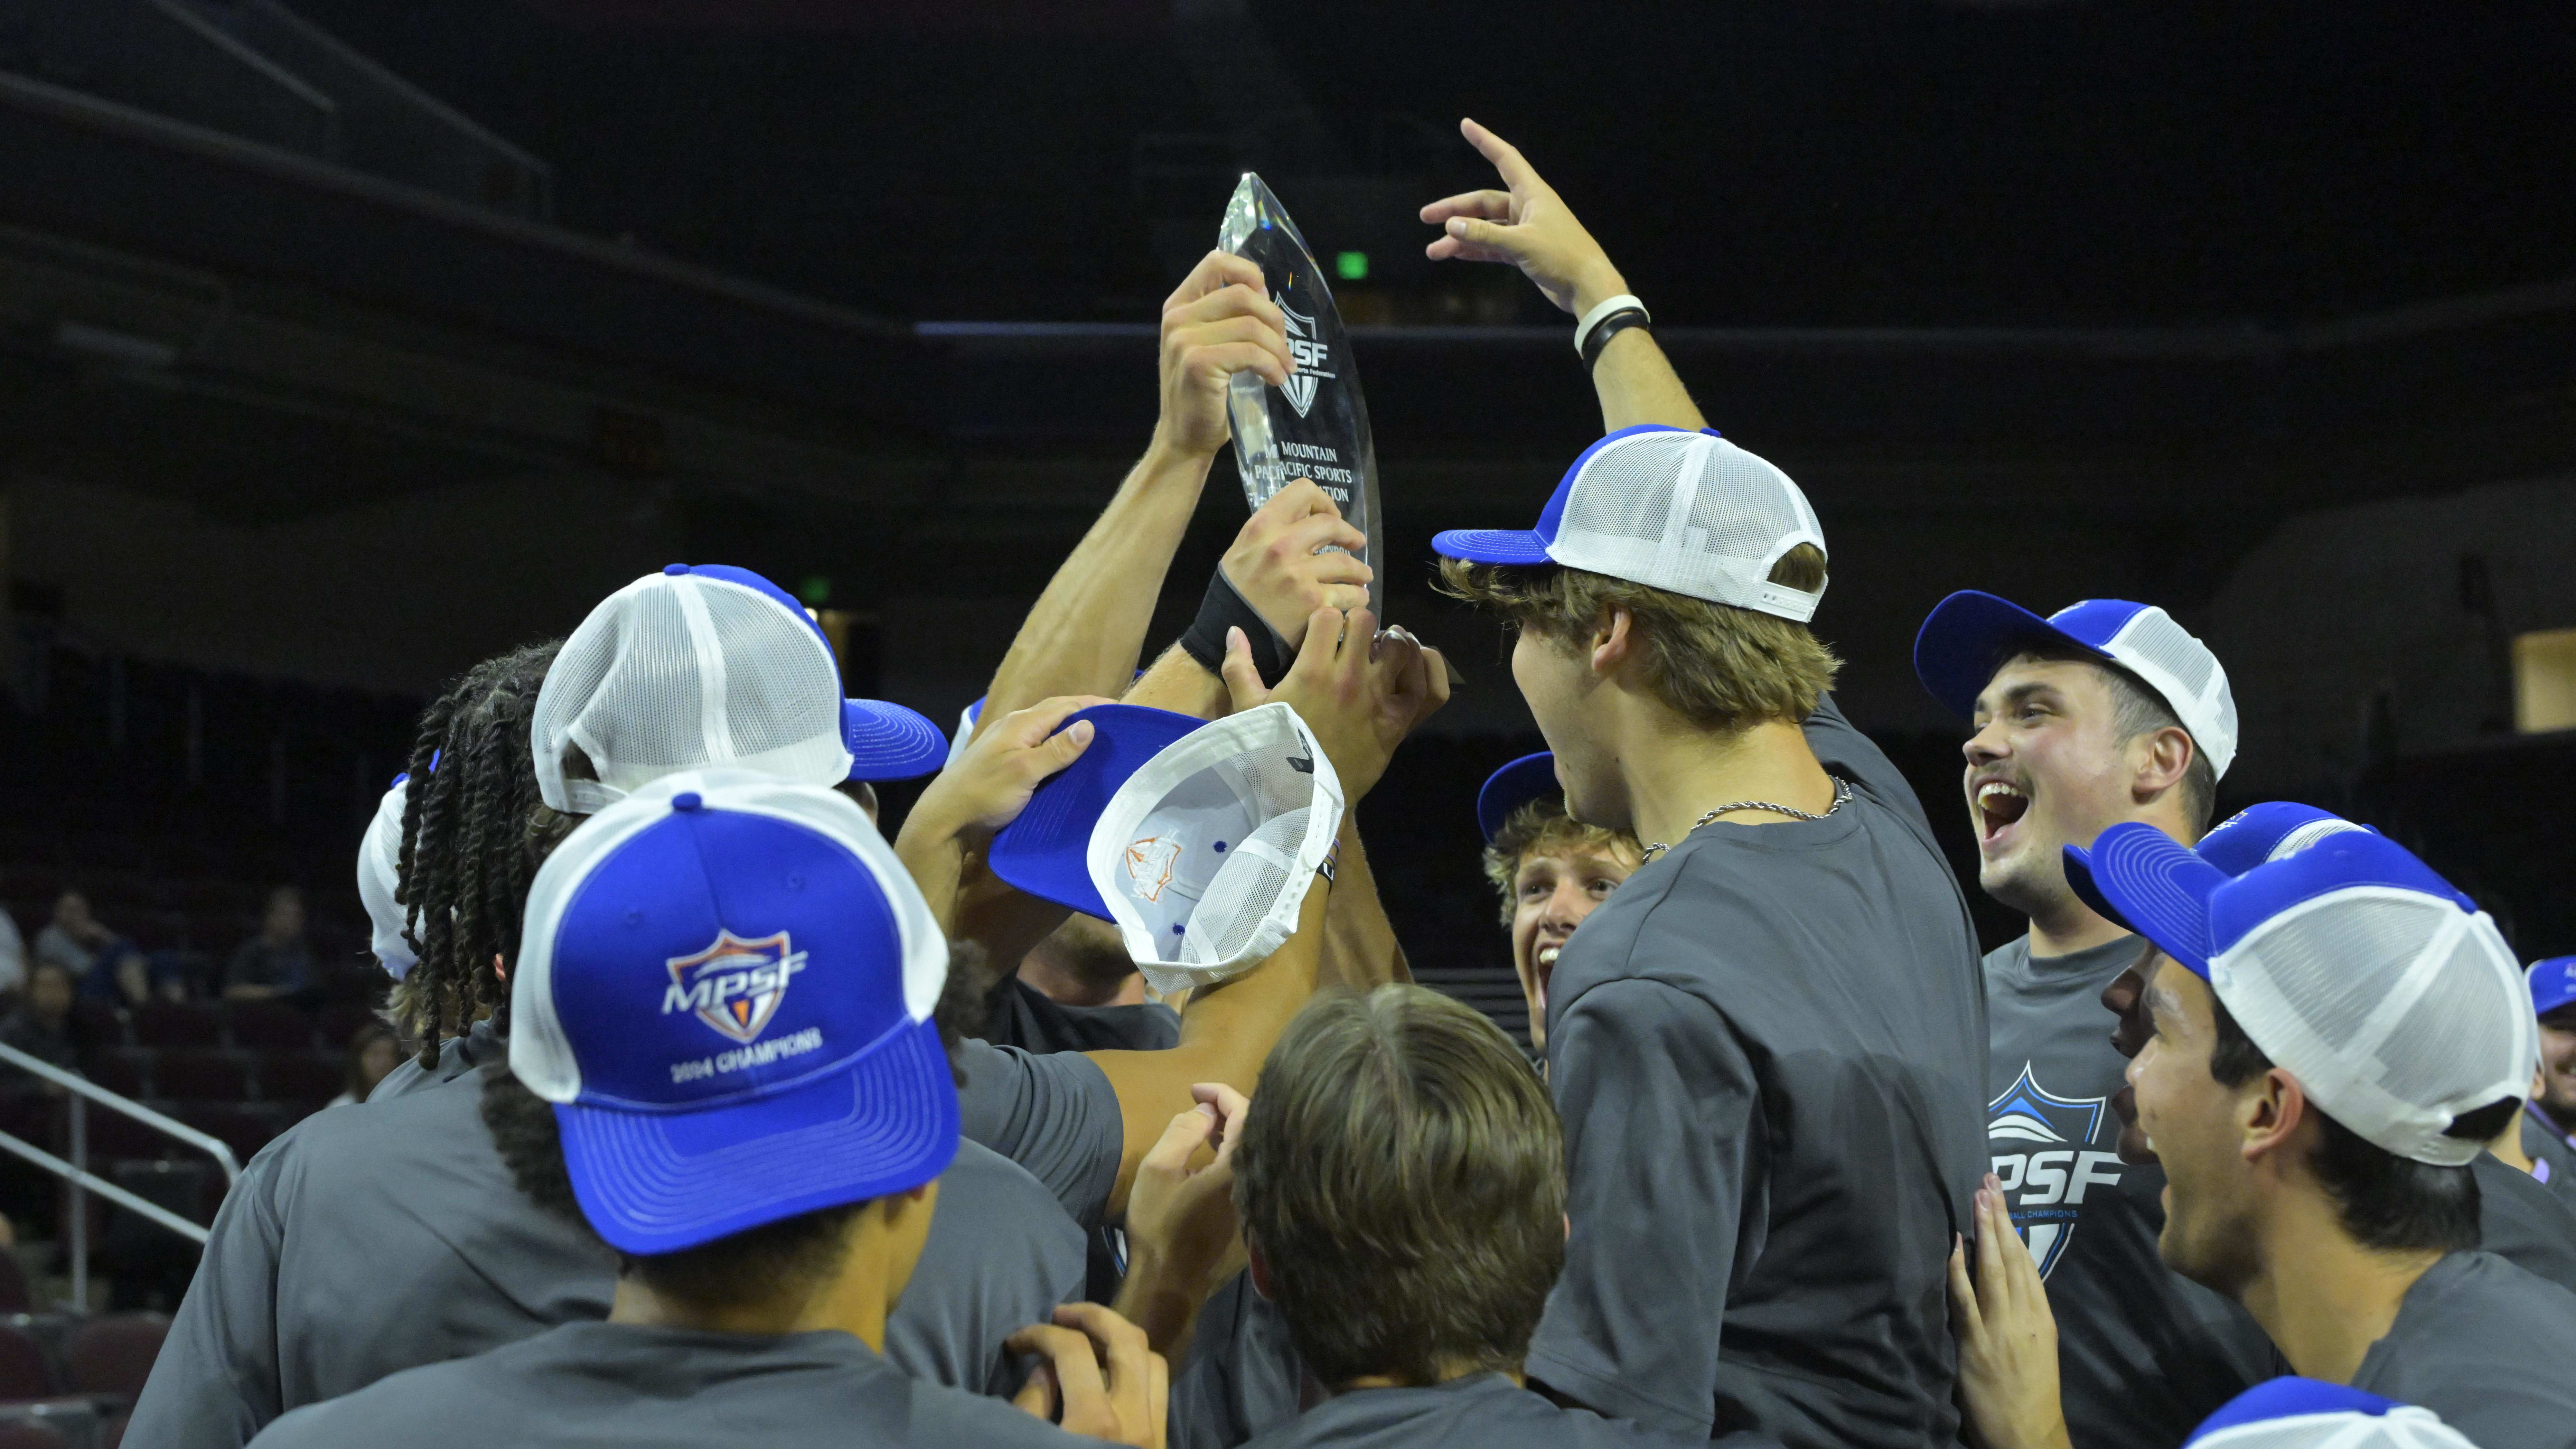 UCLA Men’s Volleyball: Bruins Claim Back-to-Back Titles After Taking Down Long Beach State